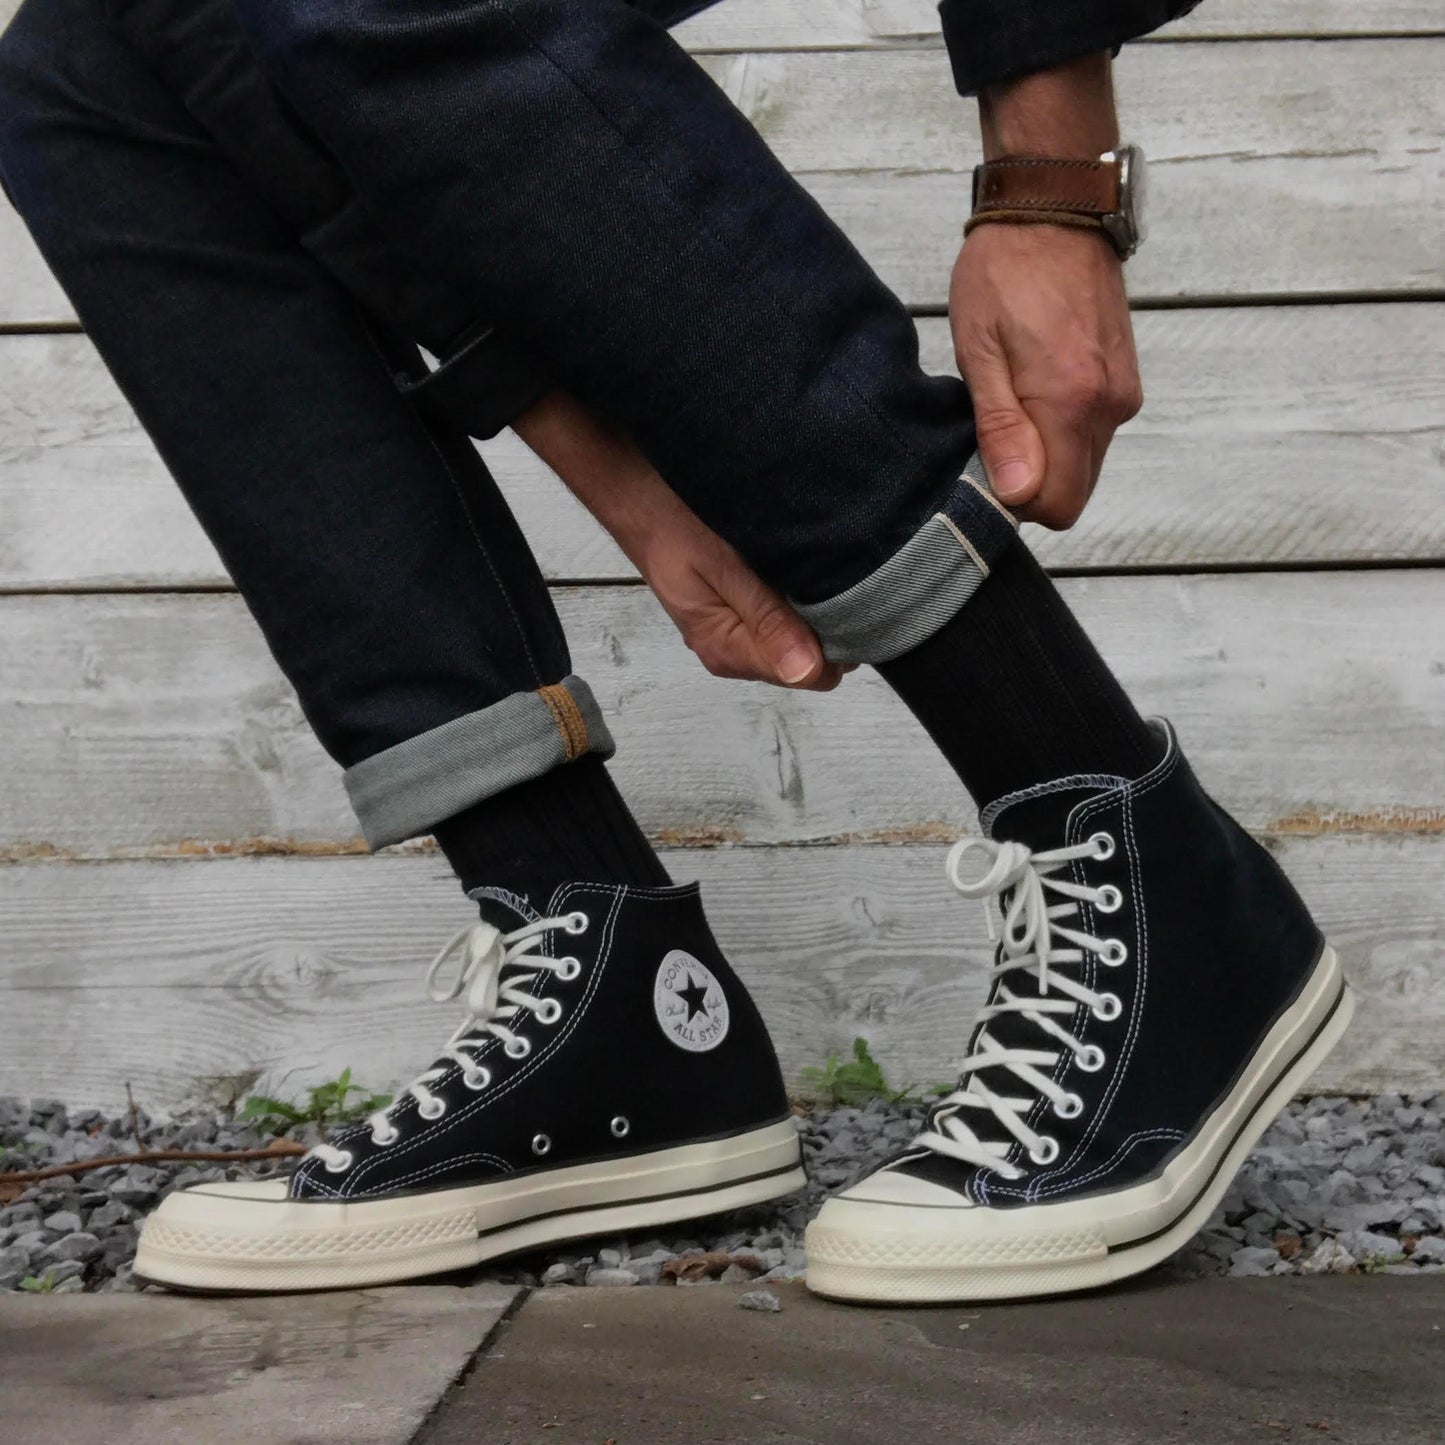 Converse chucks with Alfred knitted socks